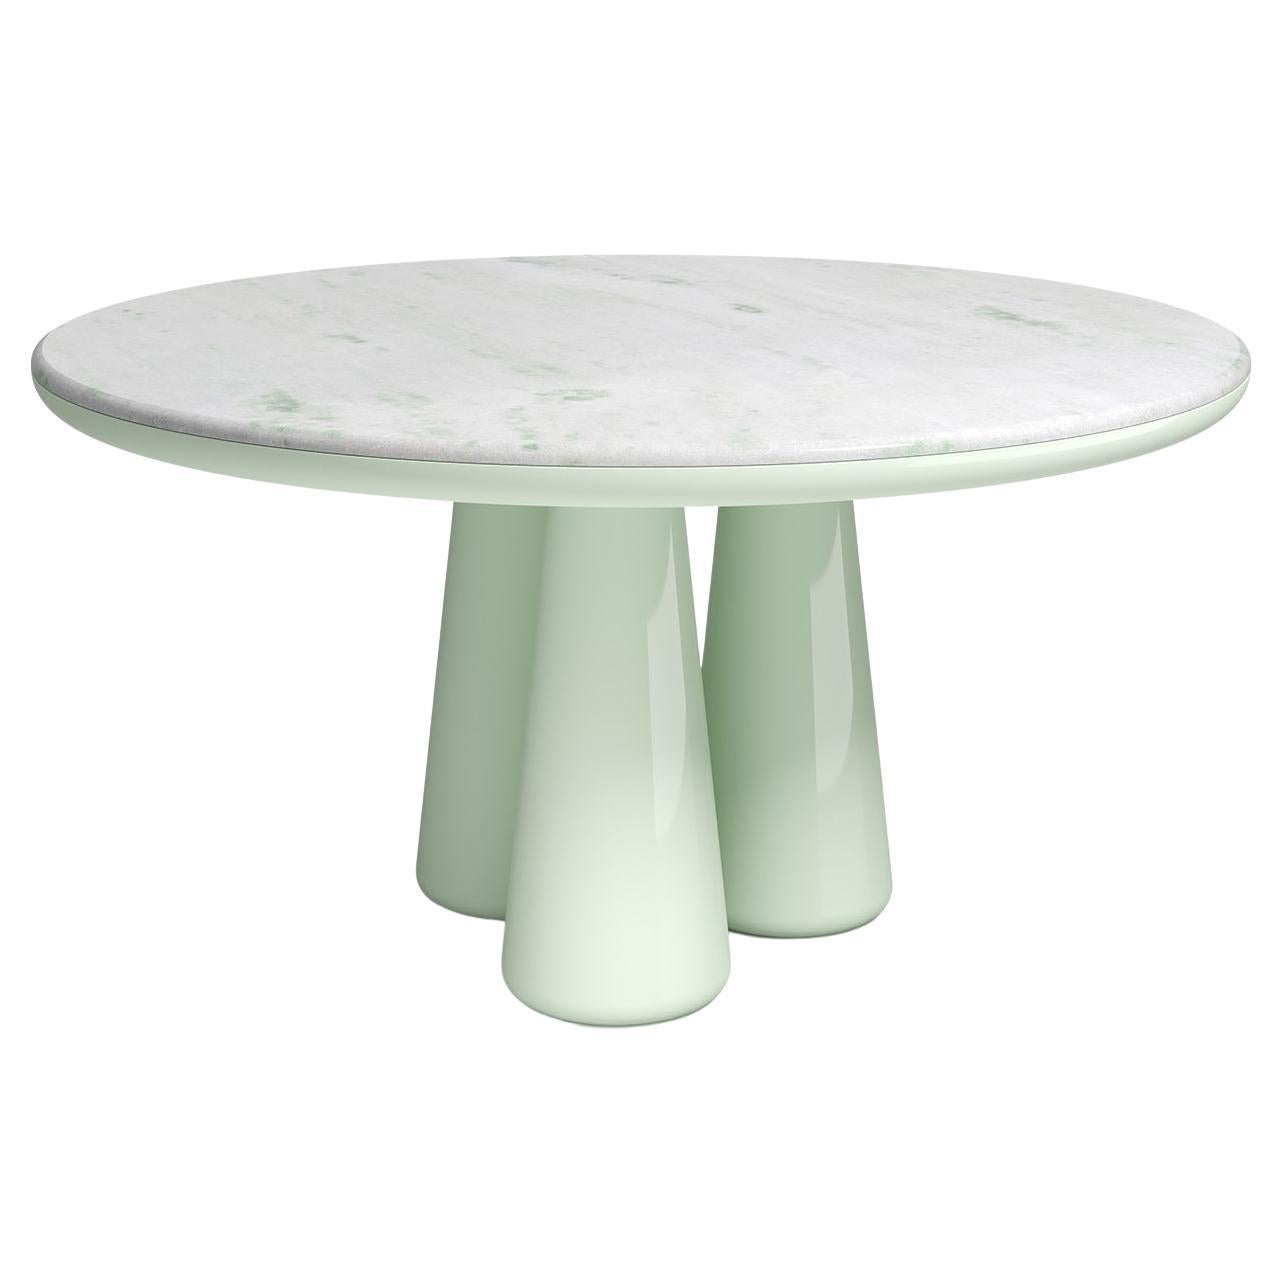 Isotopo table design by Elena Salmistraro, product by Scapin Collezioni
Limited Edition

A vibrant round top is combined with a sculptural base made of three rounded conical supports that give the product a strong